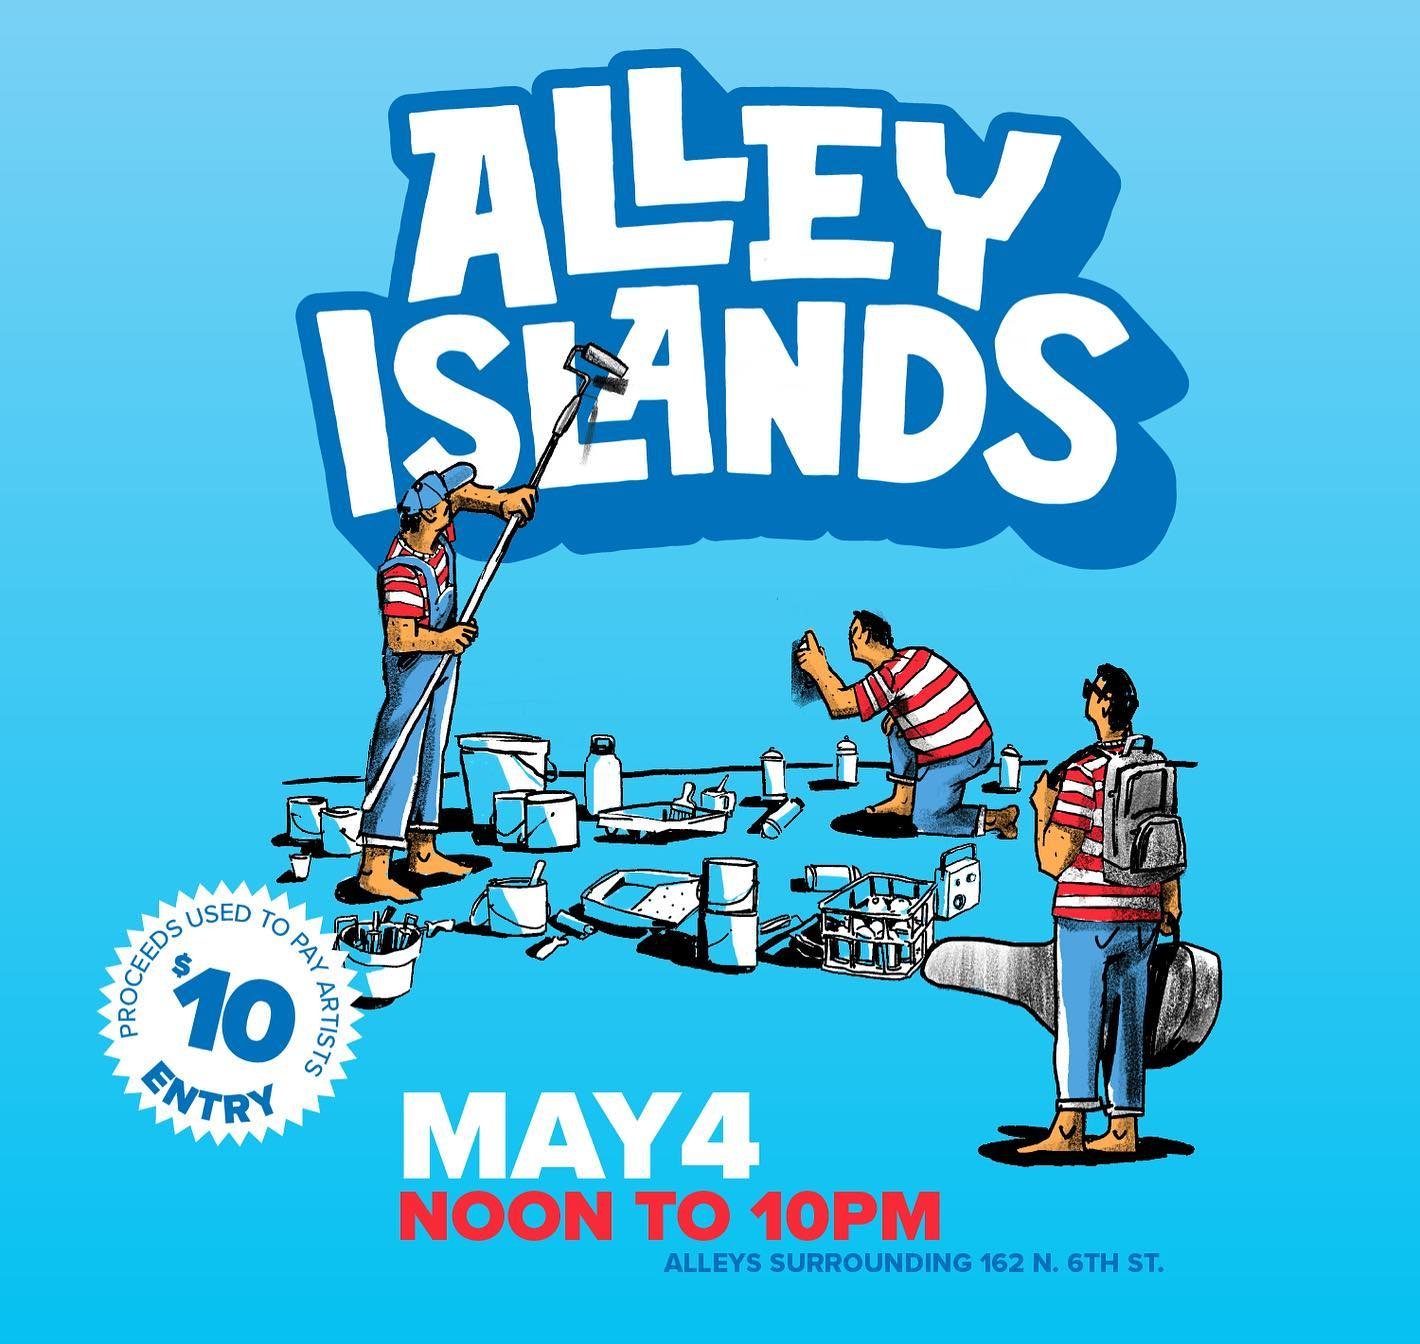 Alley Islands 2024 on May 4th!!!! Only three weeks away!!! Be there to check out some amazing art and local music plus a mural from yours truly ✨✨. @blockfort #alleyislands